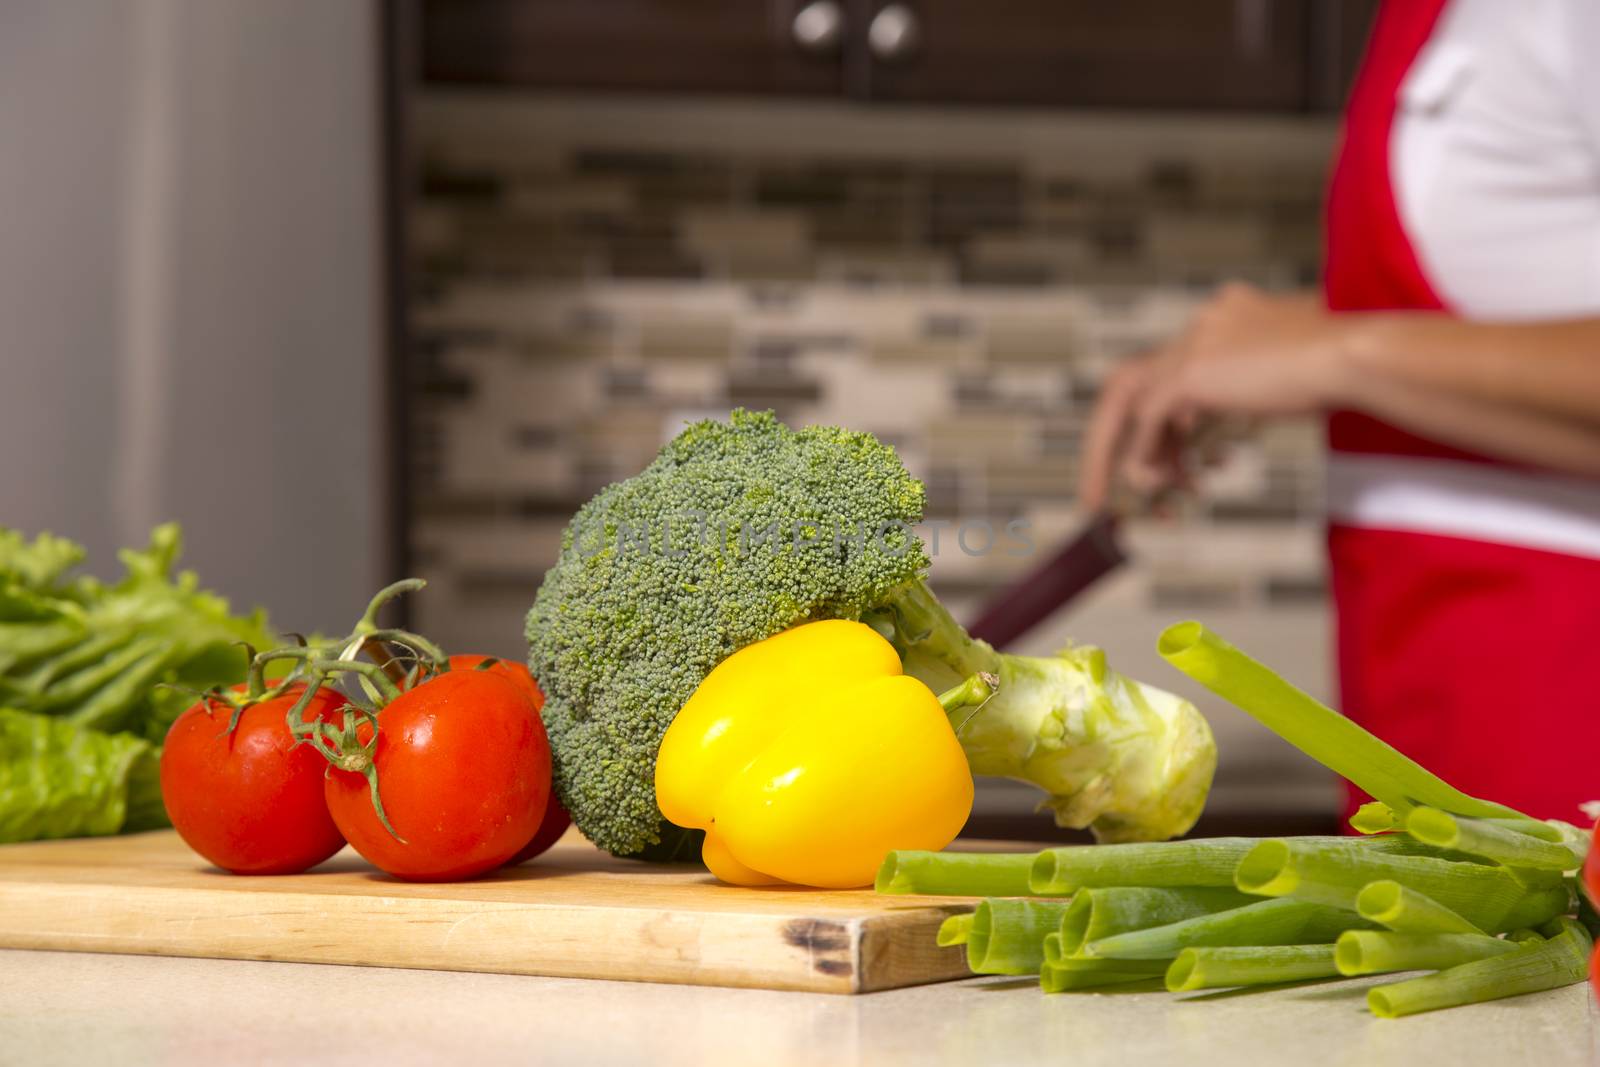 raw vegetables placed on the kitchen table with a woman in the background